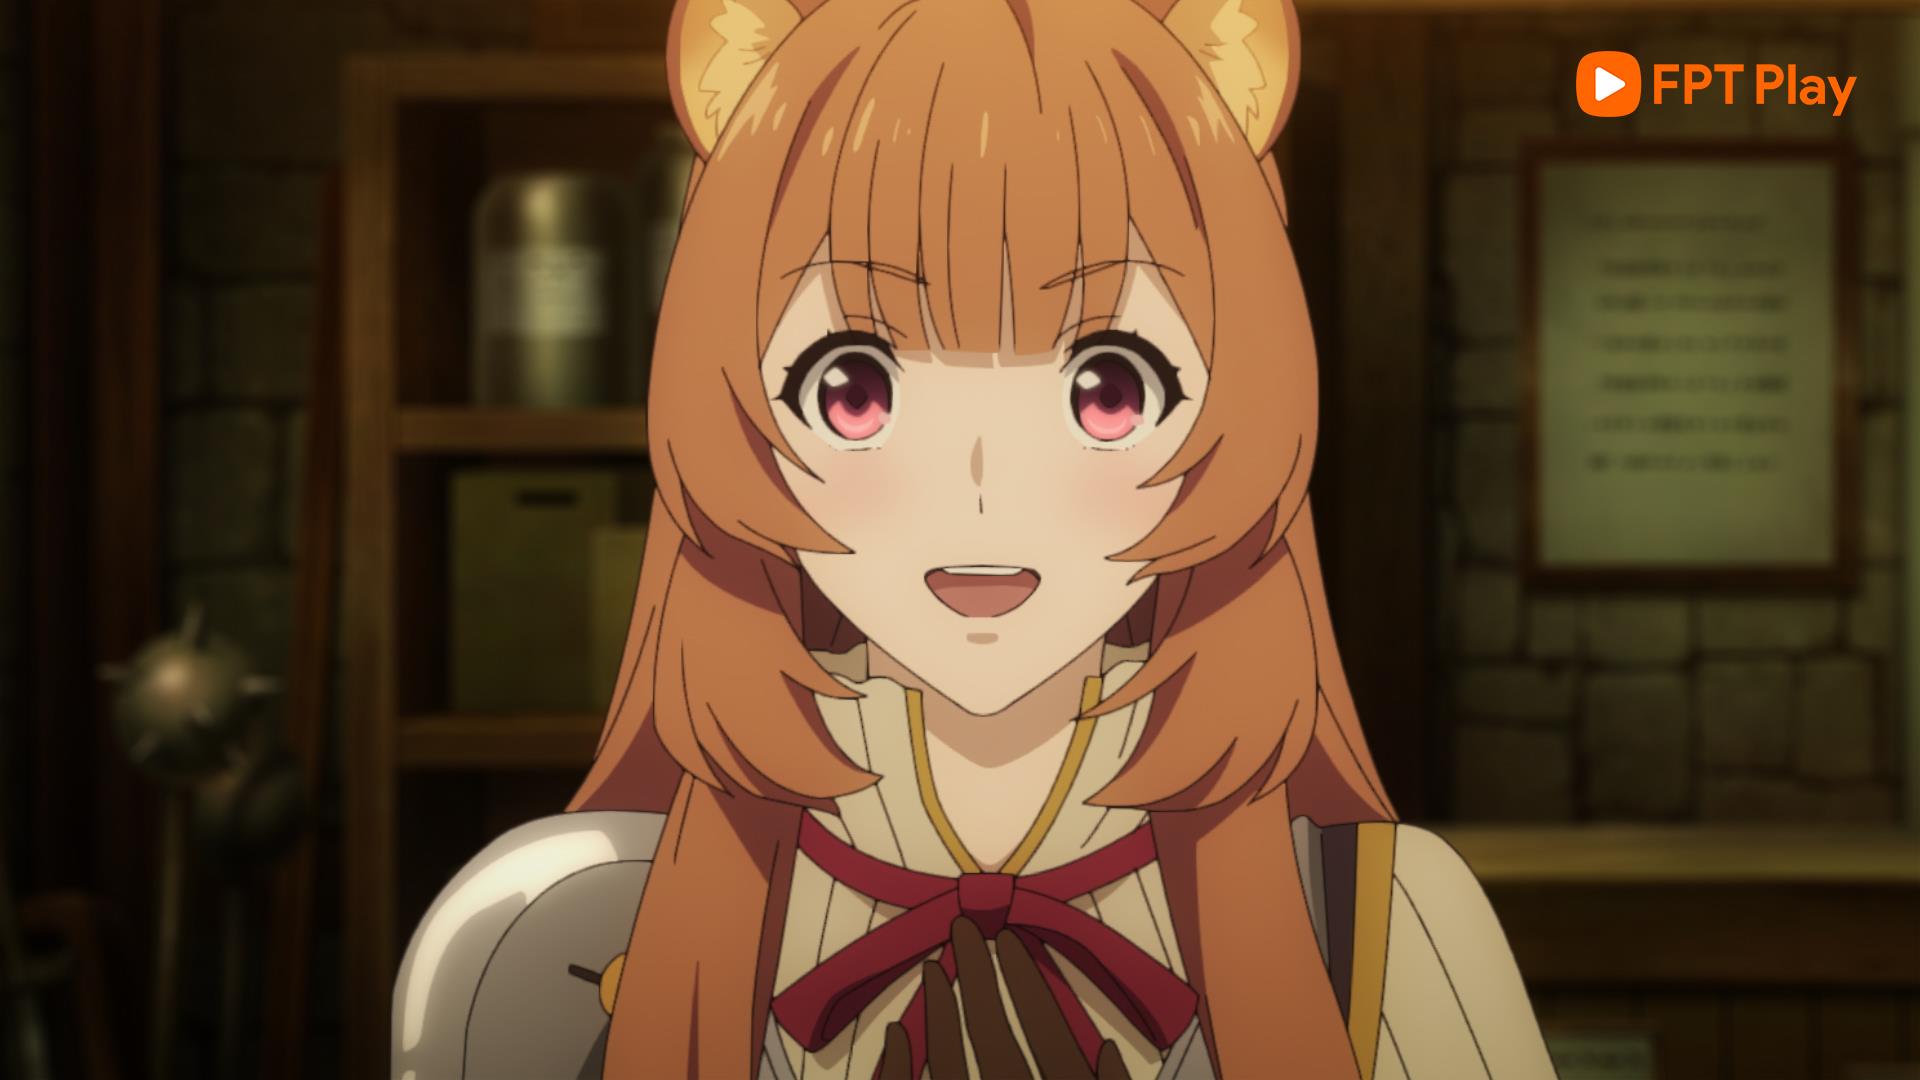 The Rising Of The Shield Hero on FPT Play: The thorny journey of the outcast hero - Photo 5.